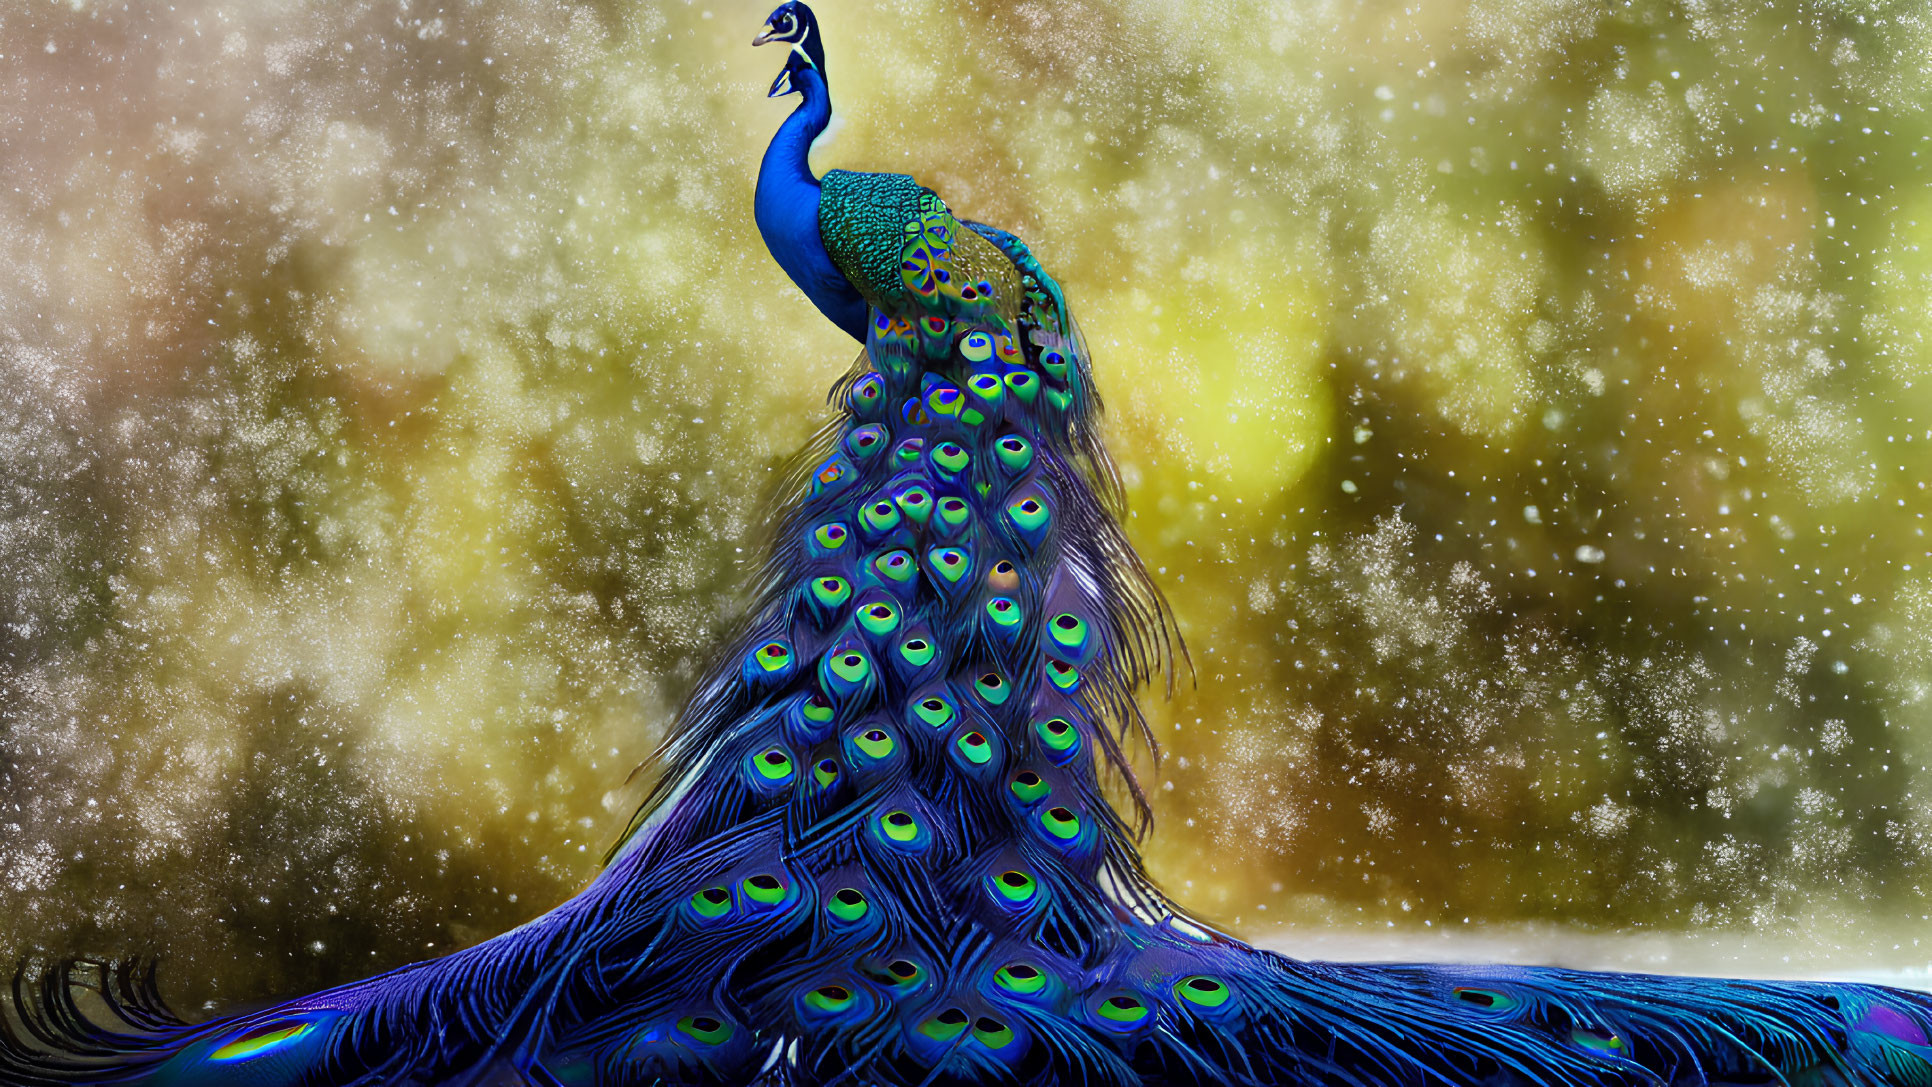 Colorful peacock illustration on glittery golden backdrop